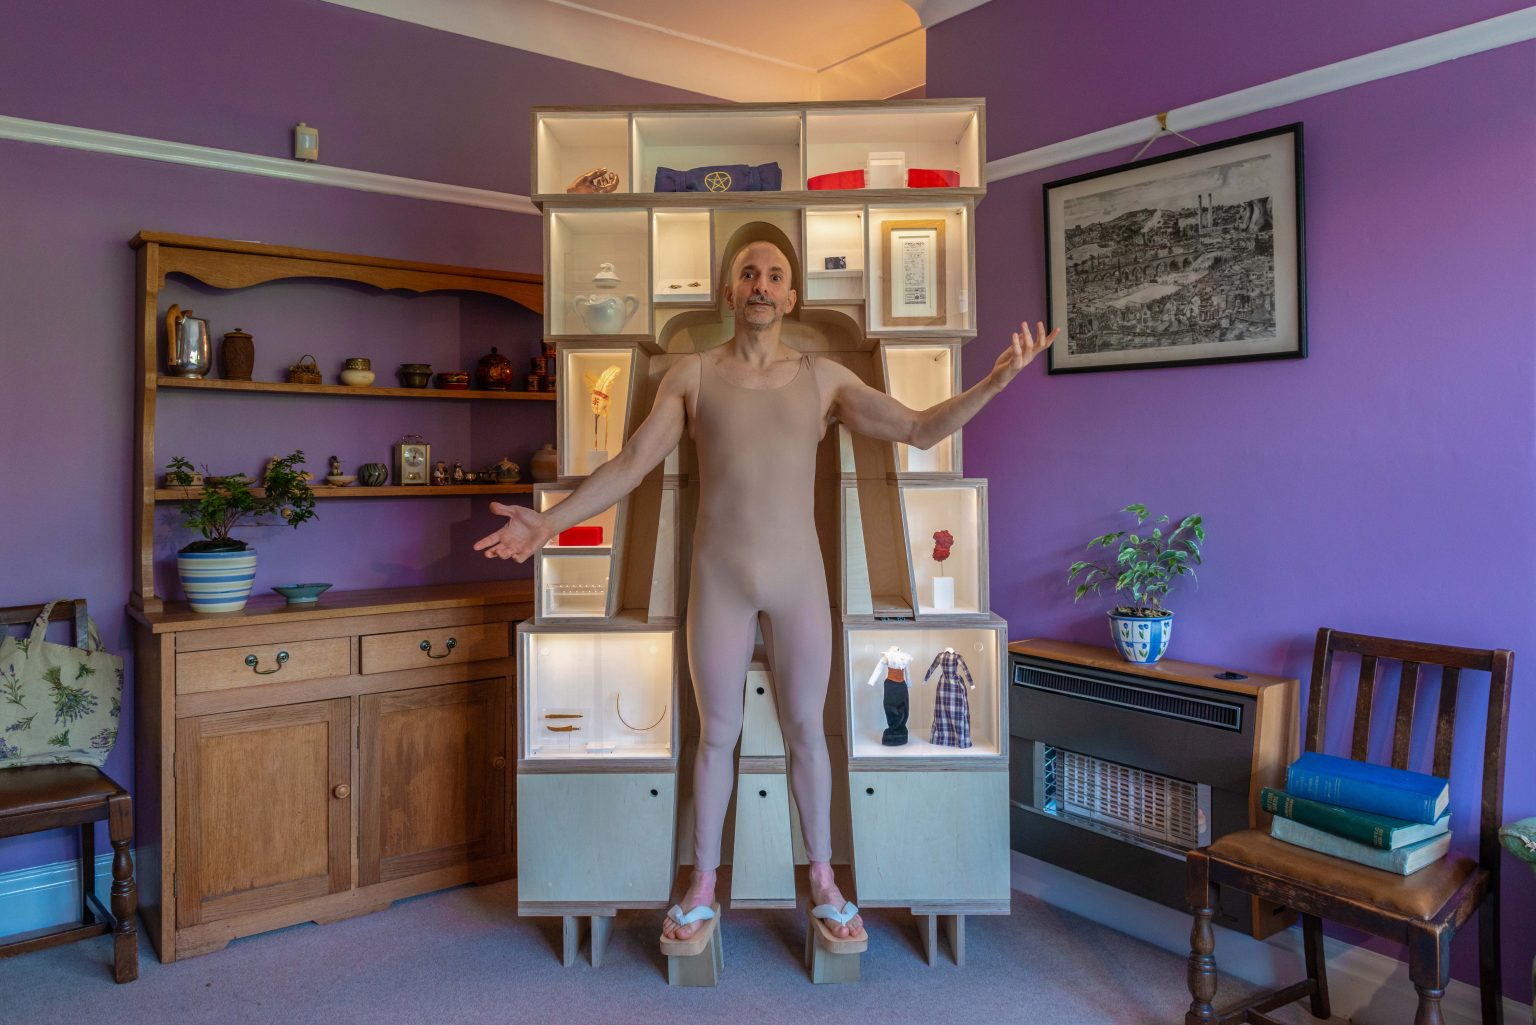 A person in a mauve bodysuit stands in a living room with purple walls. Behind them are shelves with objects, to the side is a wooden dresser with shelves, a framed print, an old style gas fire topped with a potted plant.